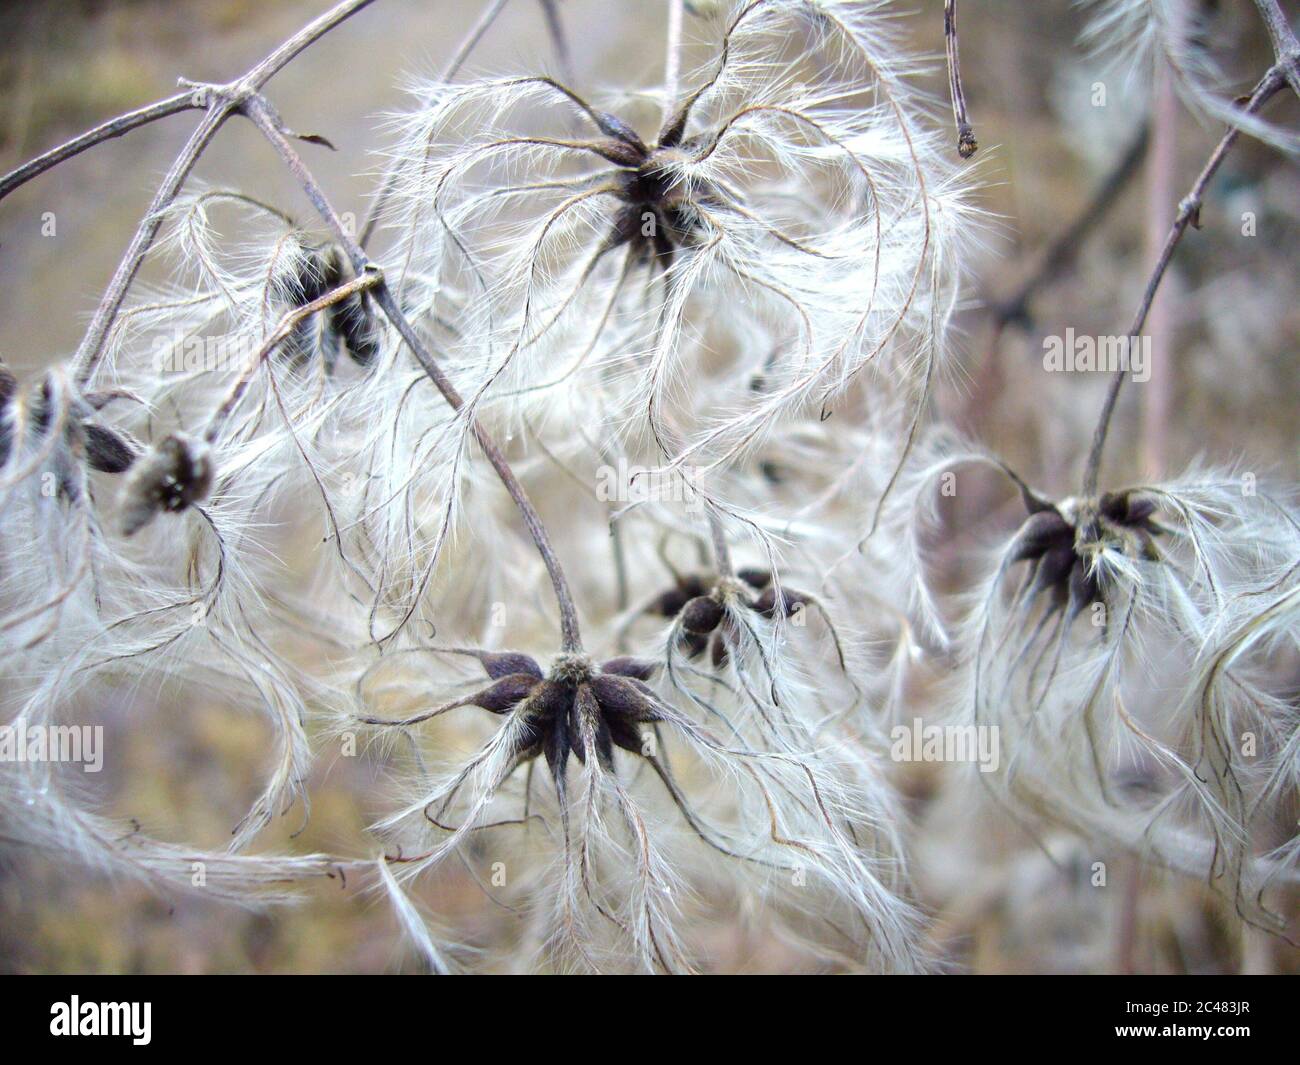 Closeup shot of old man's beard in a field under the sunlight with a blurry background Stock Photo